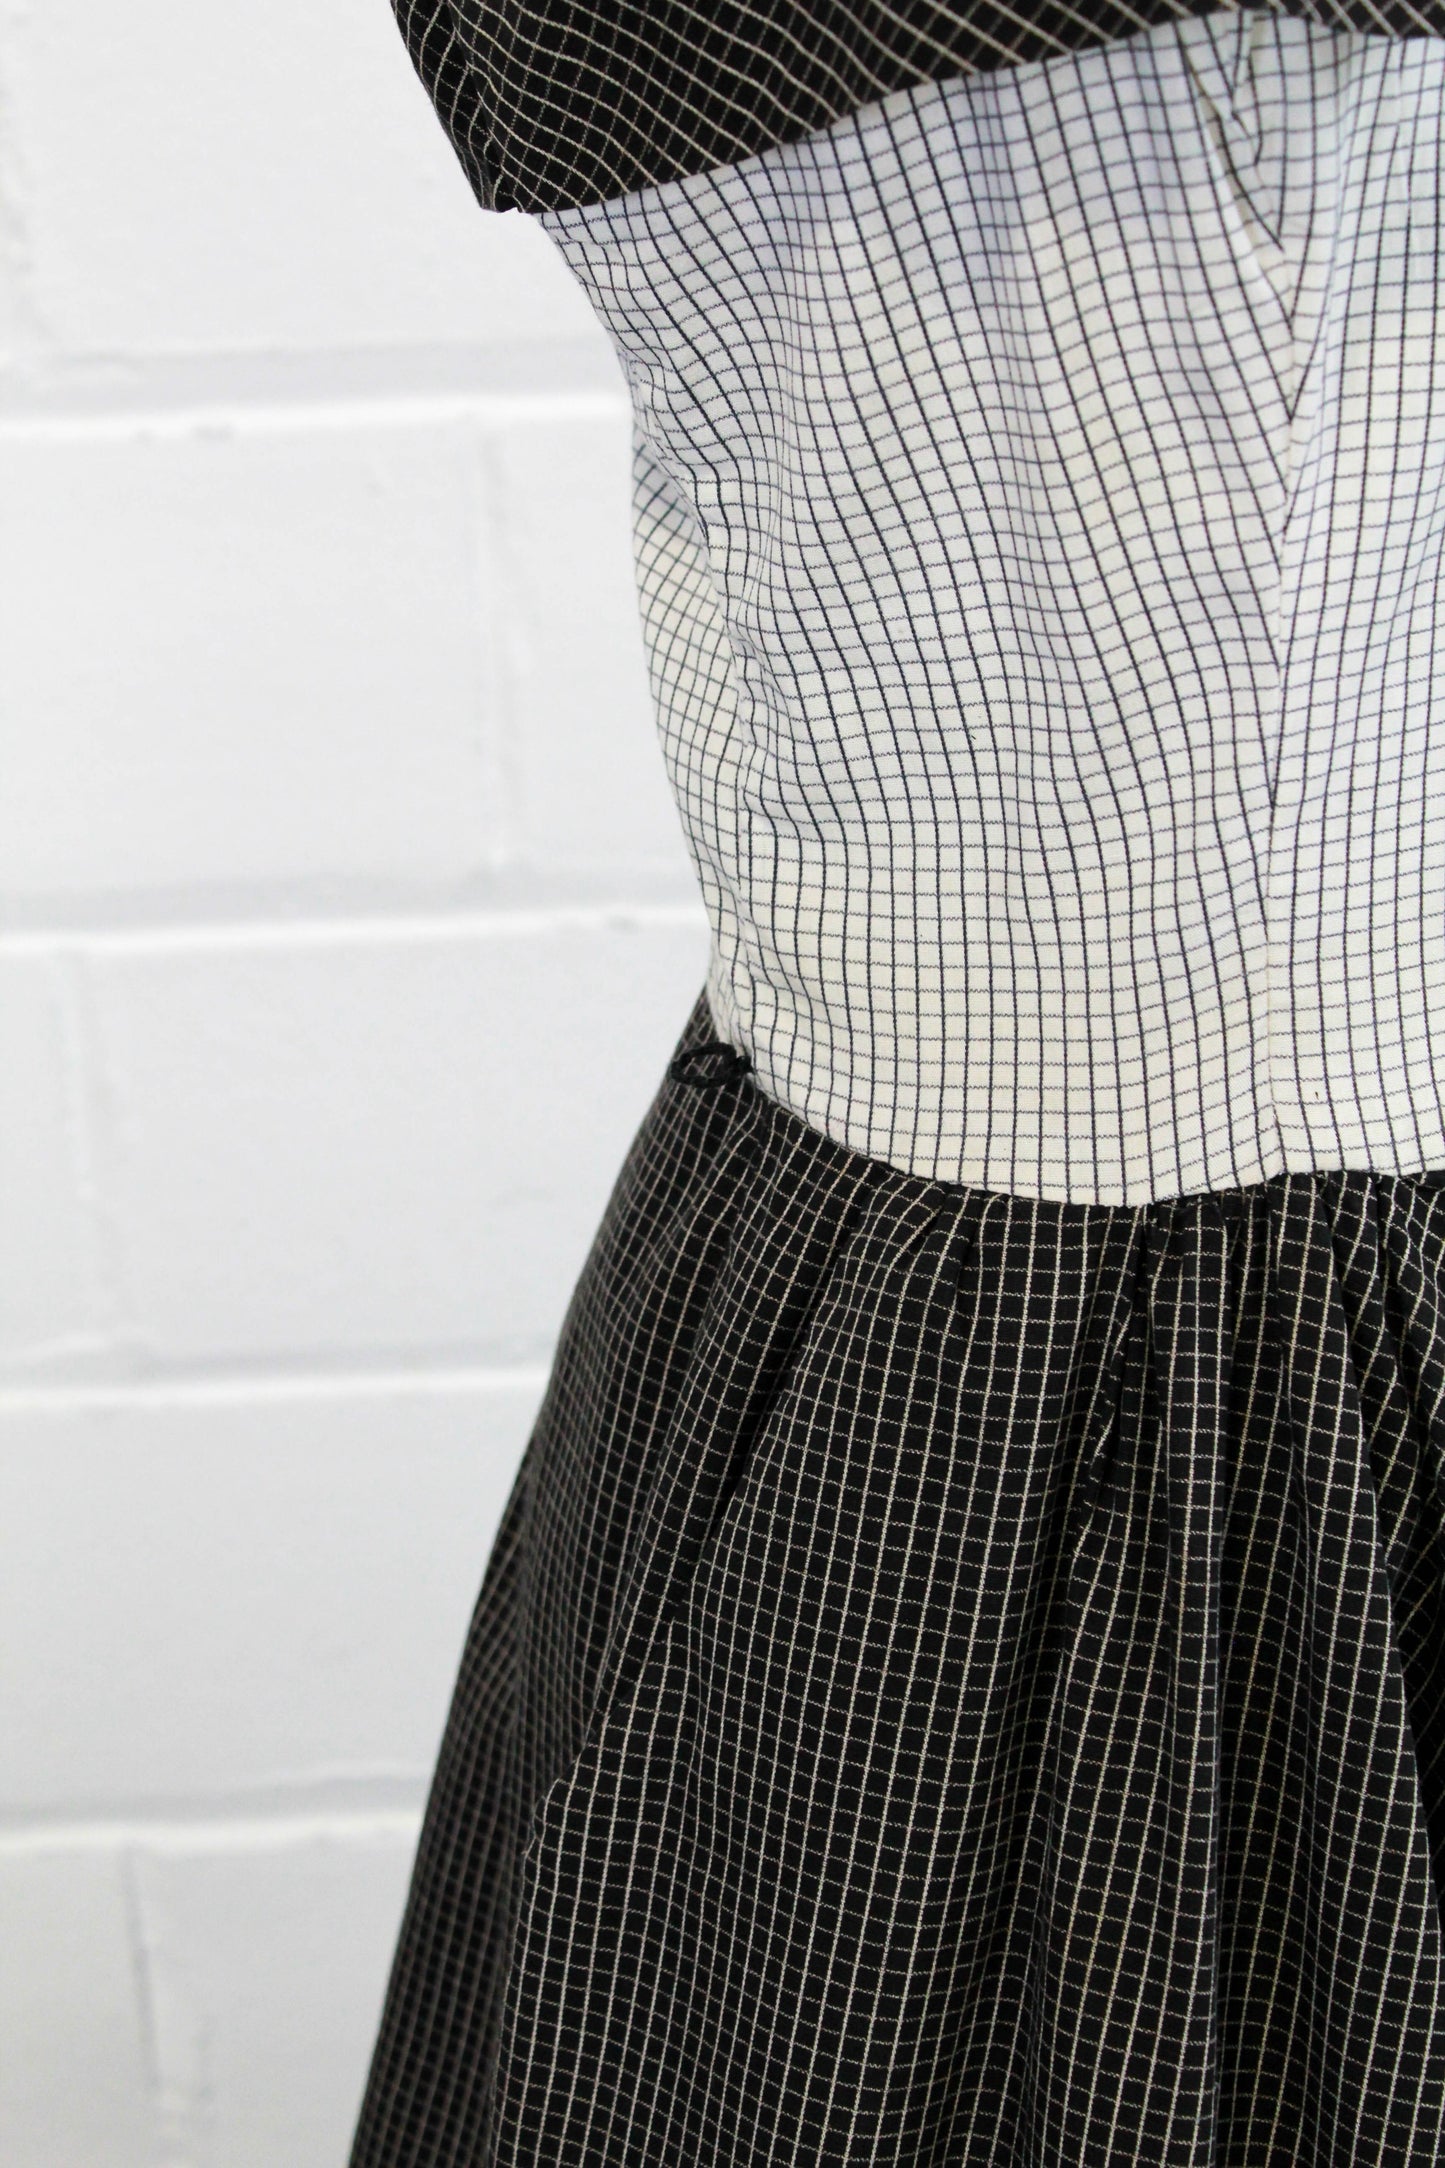 Vintage 1950s White and Black Checked Sundress, Small